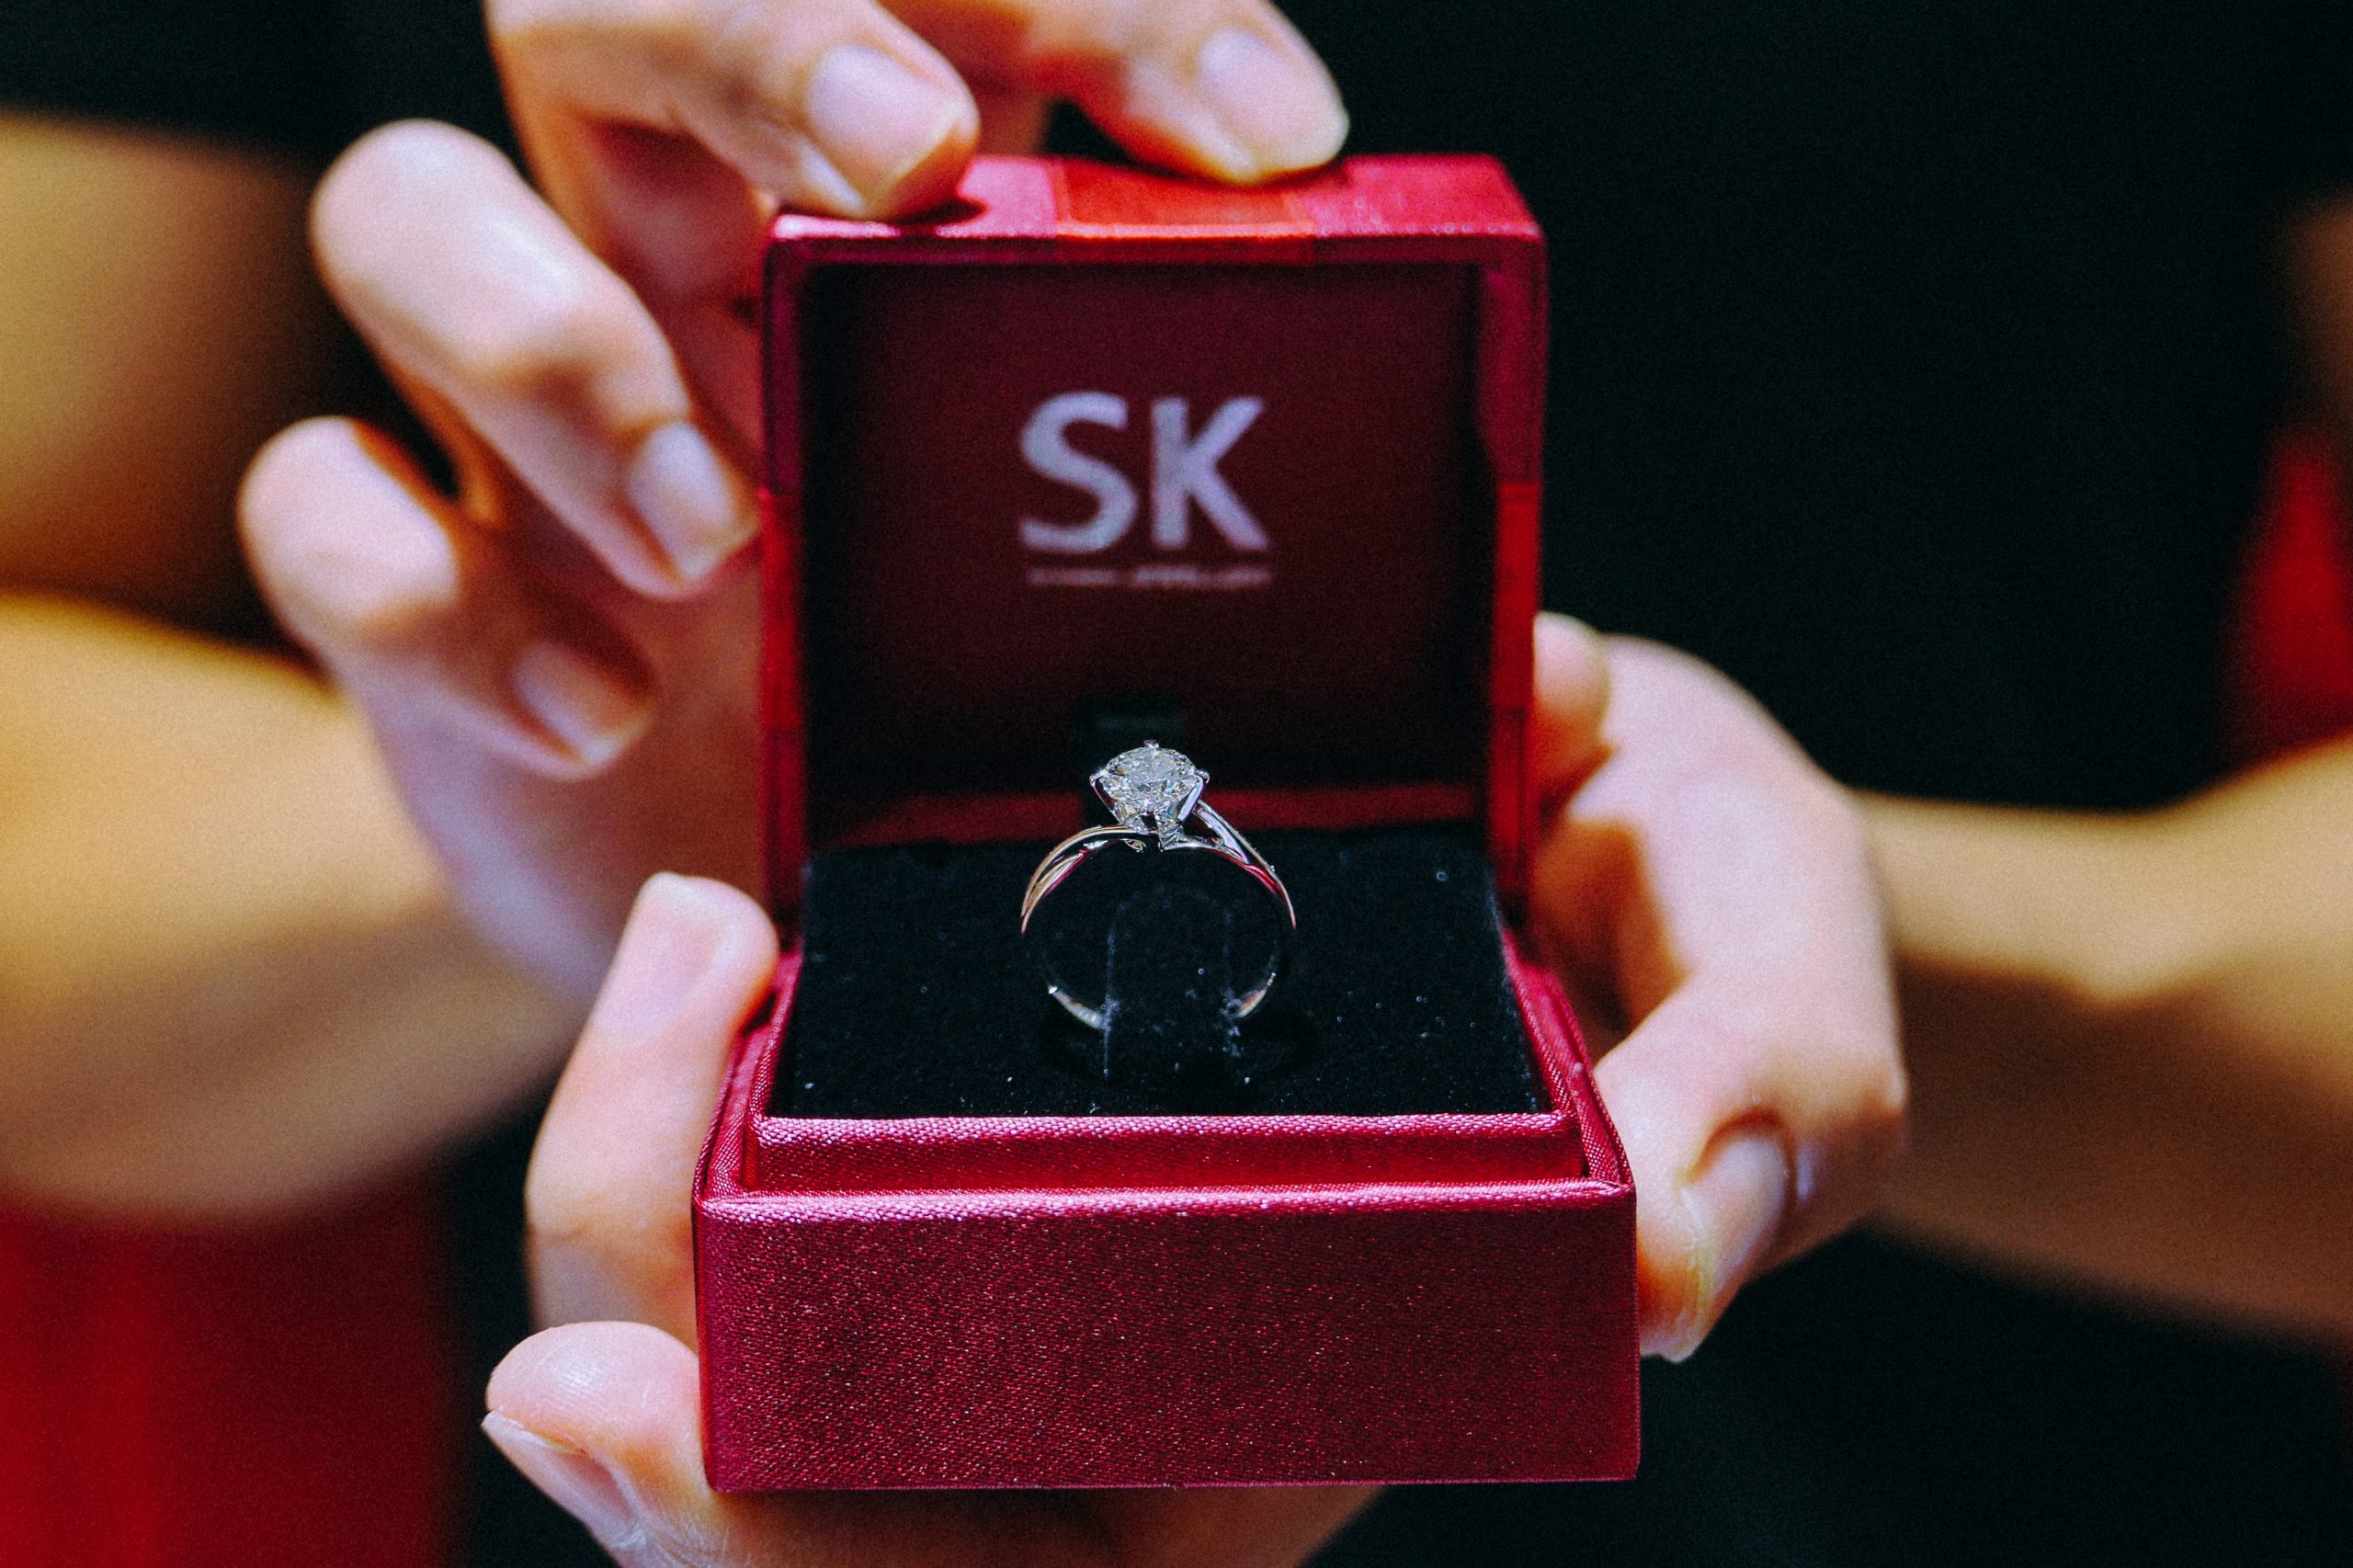 Singaporean Men on the Pressures of Searching for the Perfect Wedding Ring